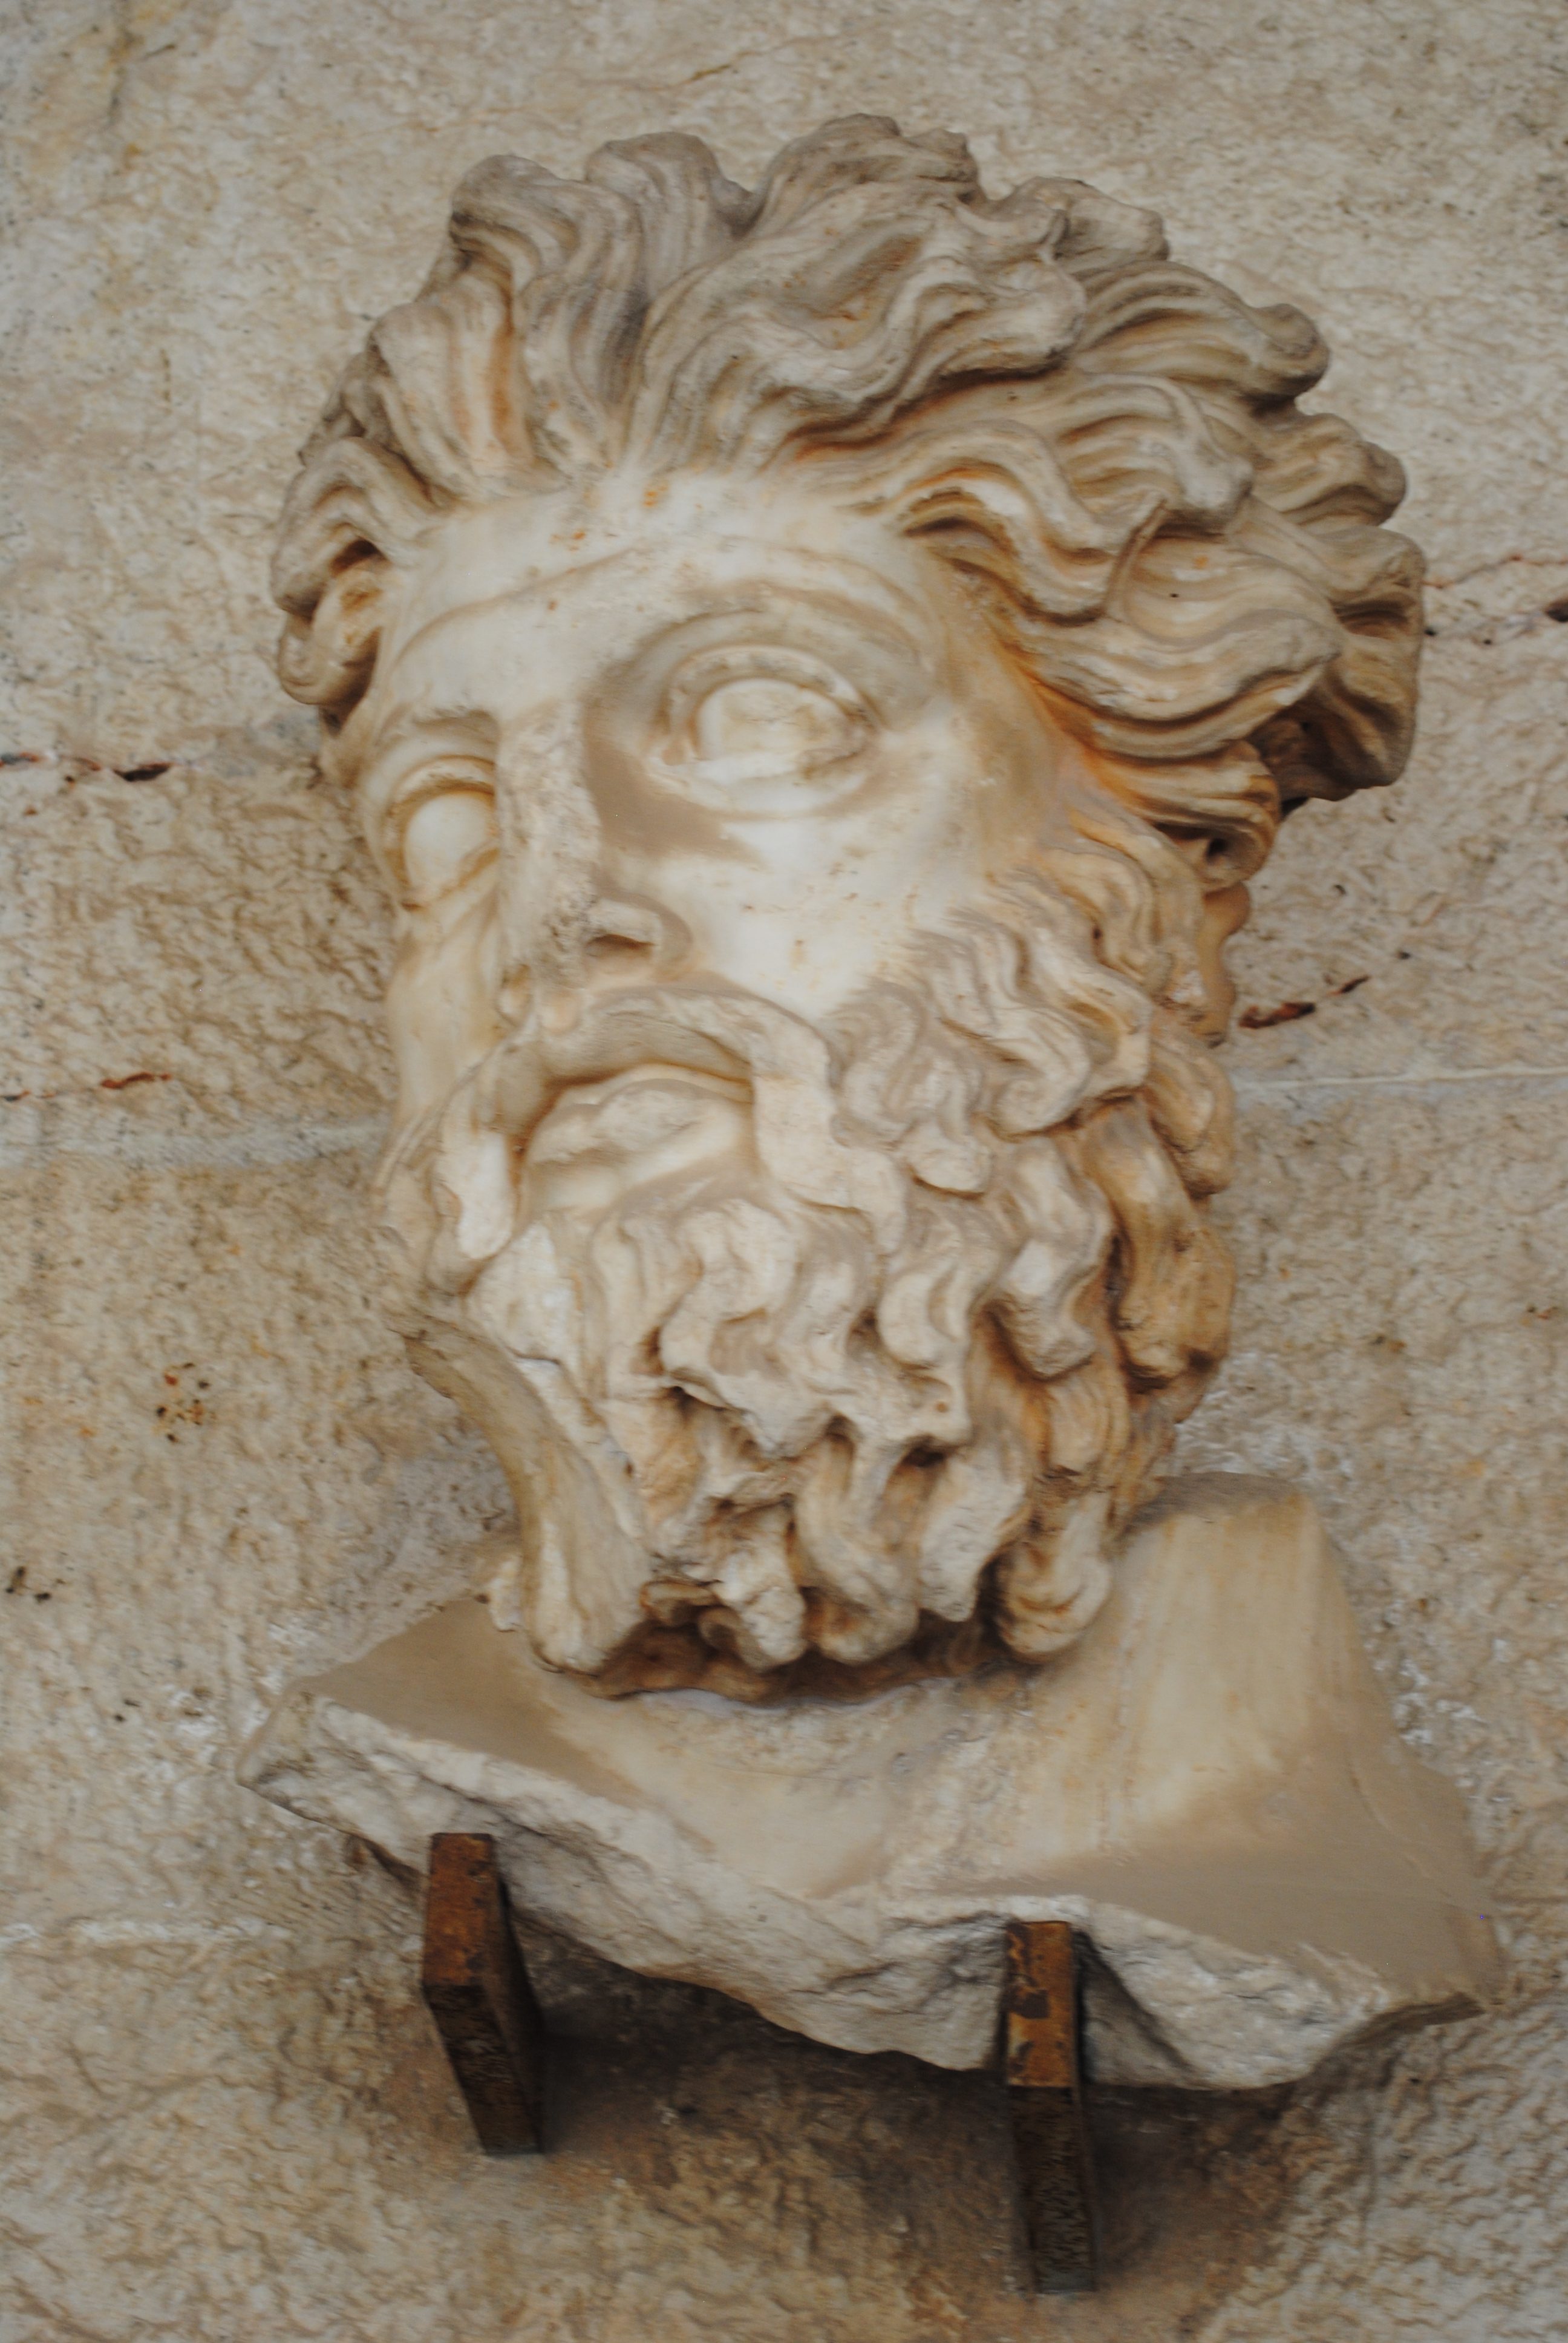 Sculpture at the Stoa of Attalos in Athens